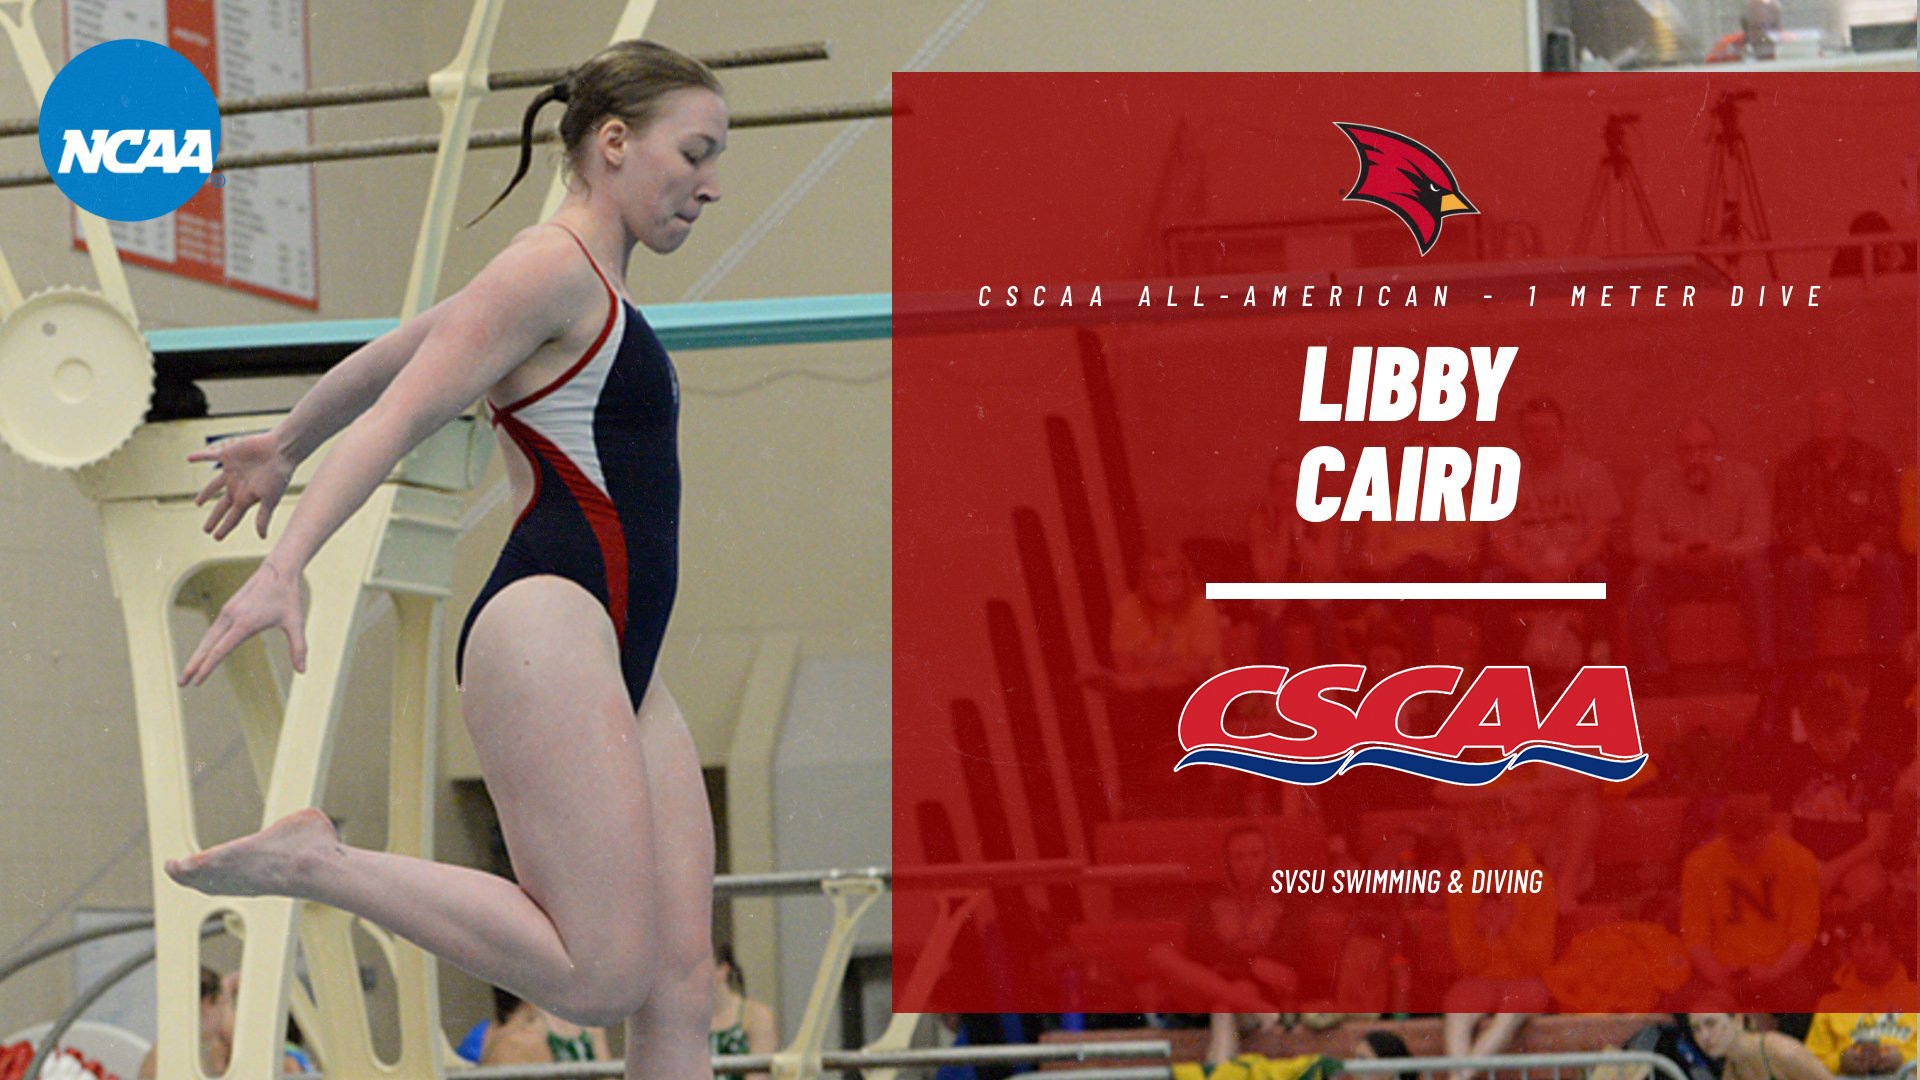 CSCAA Names Libby Caird to All-America Team